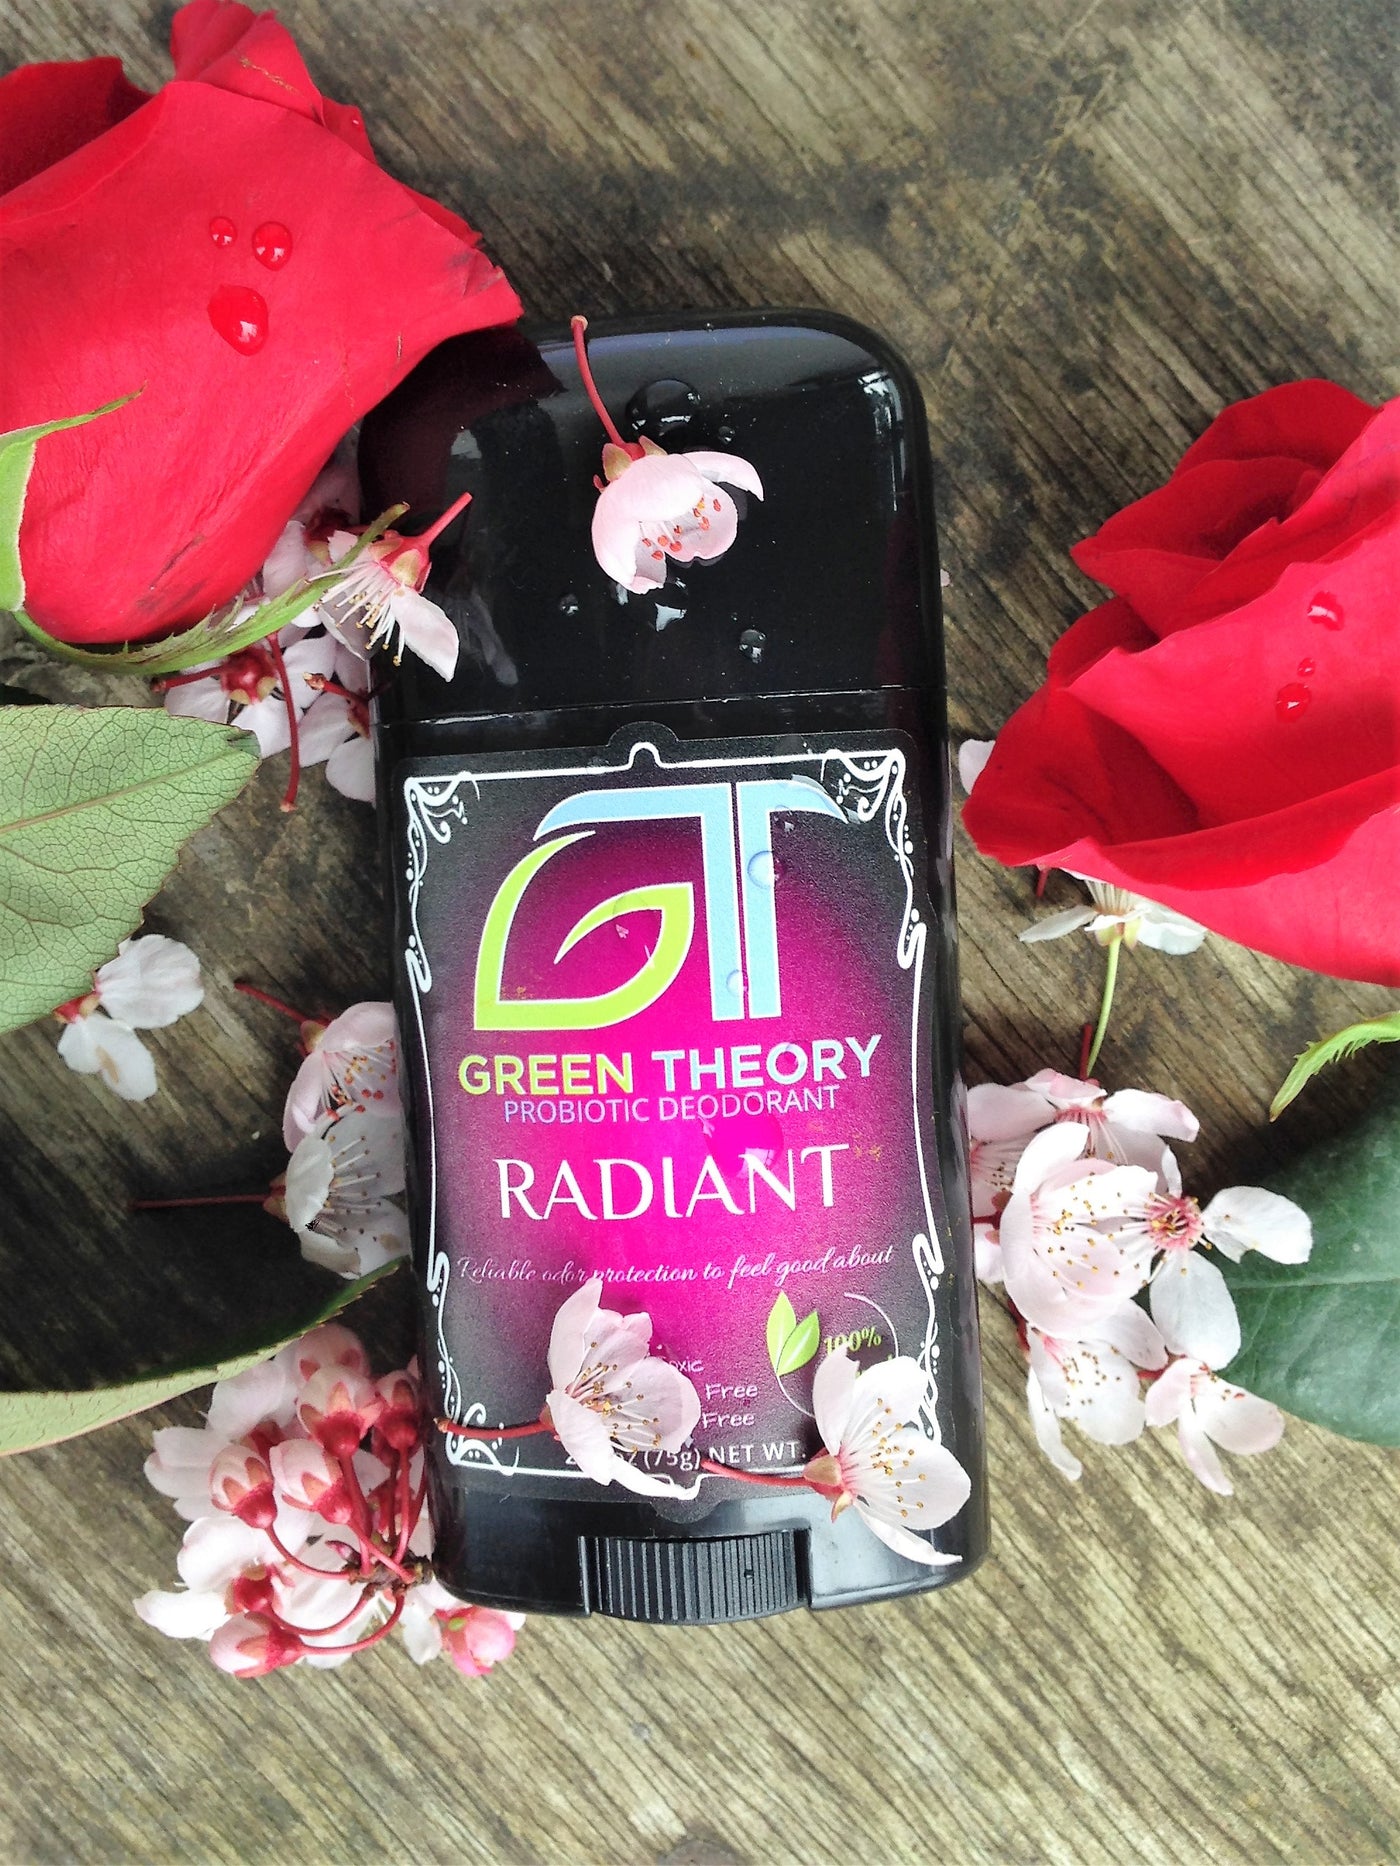 green theory radiant probiotic natural aluminum free deodorant laying on a wood grain texture with two roses placed on each side and little white flowers sprinkled over the container